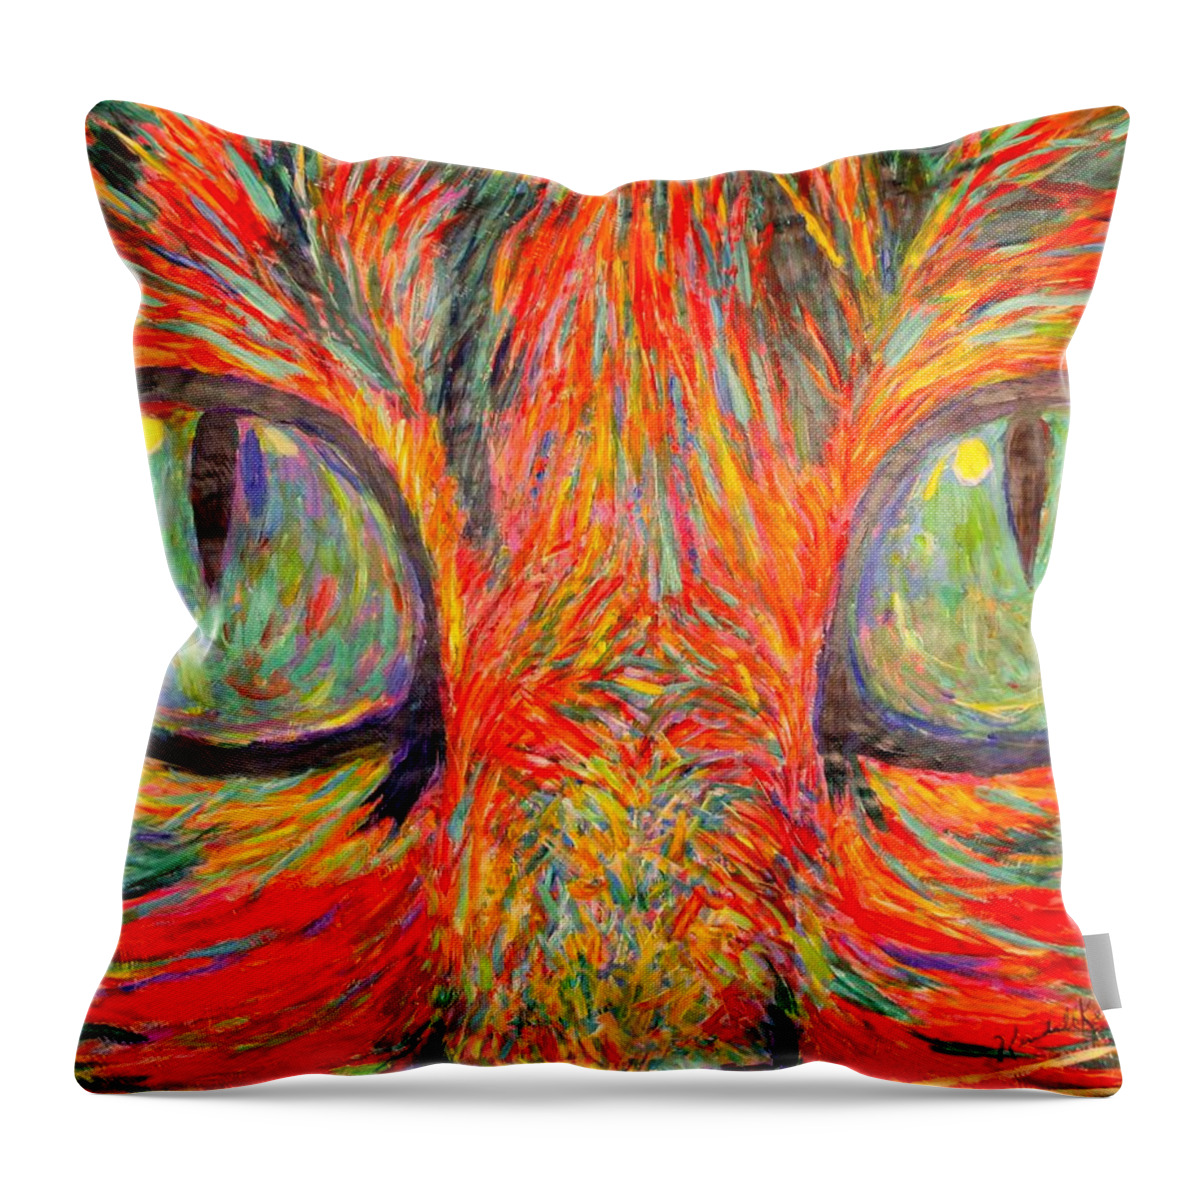 Cats Eyes Throw Pillow featuring the painting Cats Eyes by Kendall Kessler